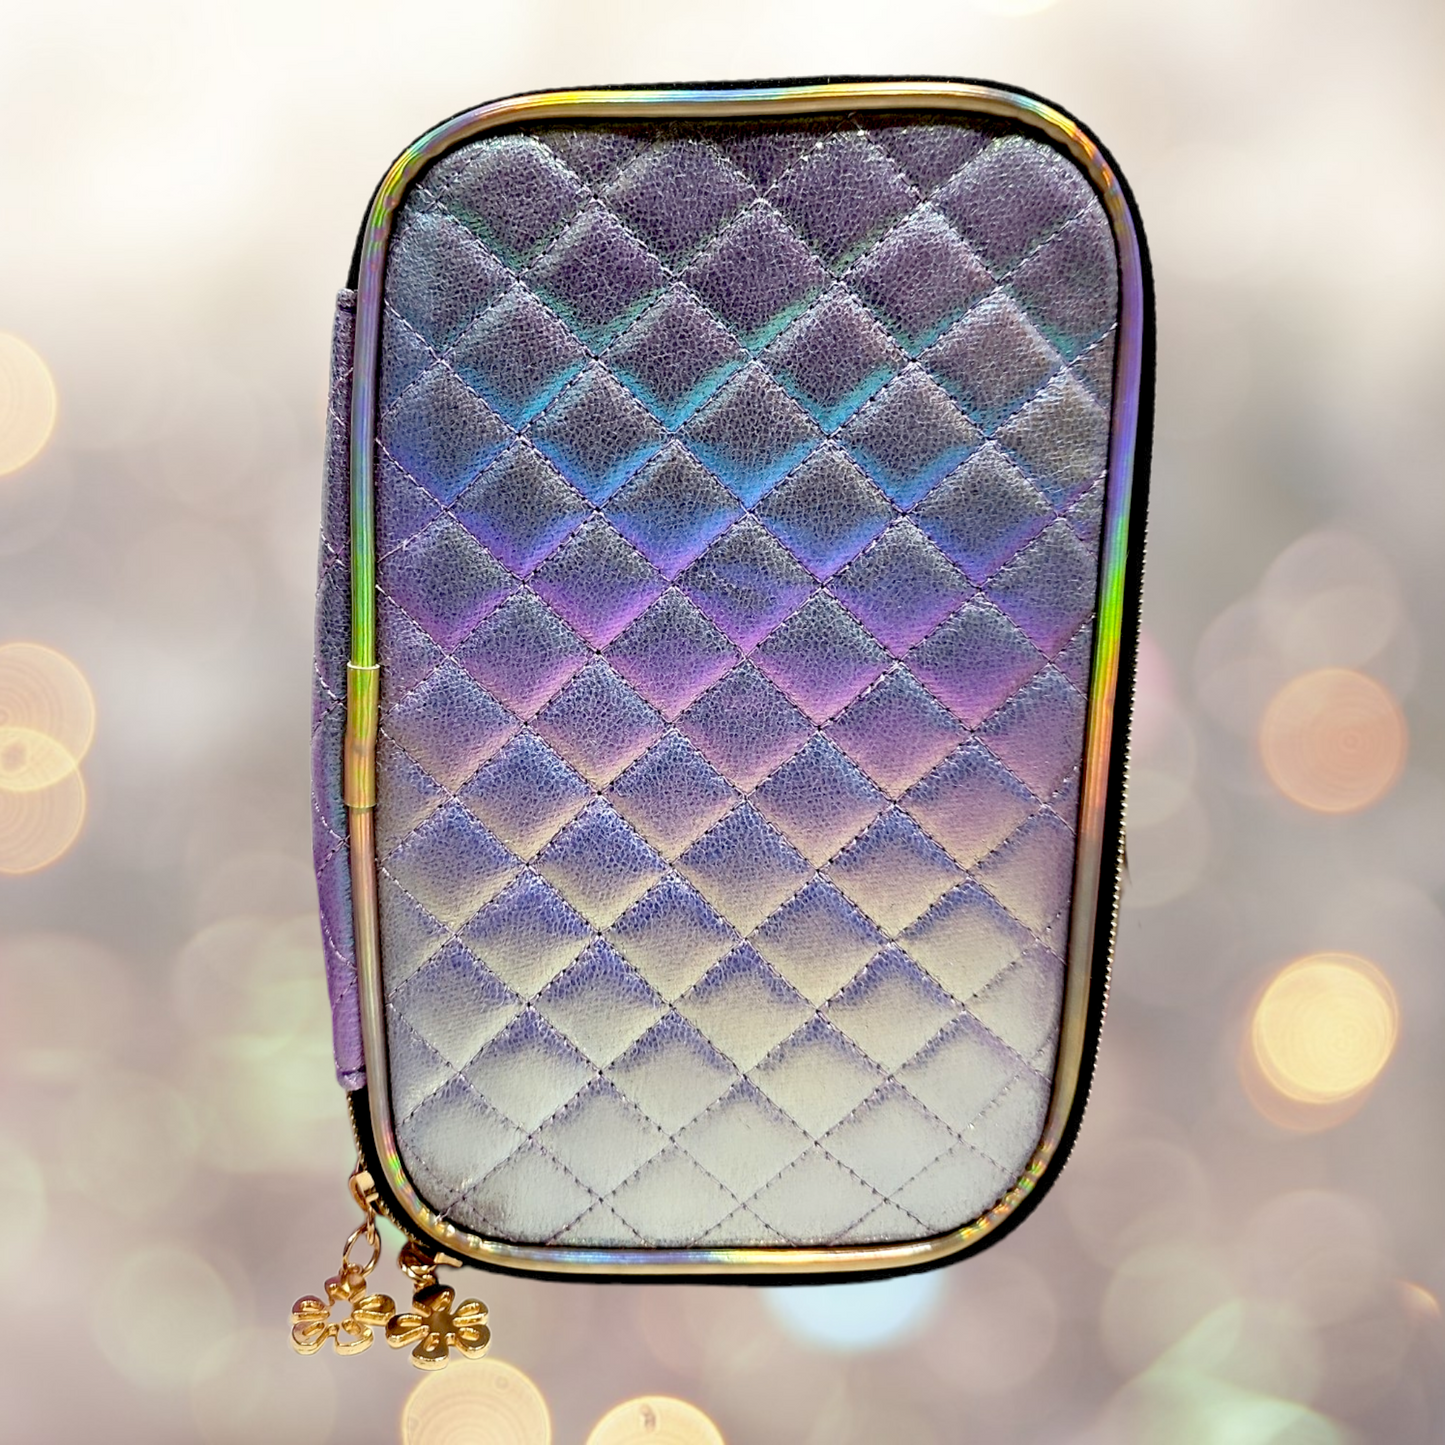 Holographic Reflective Train-Case Style Makeup Bag